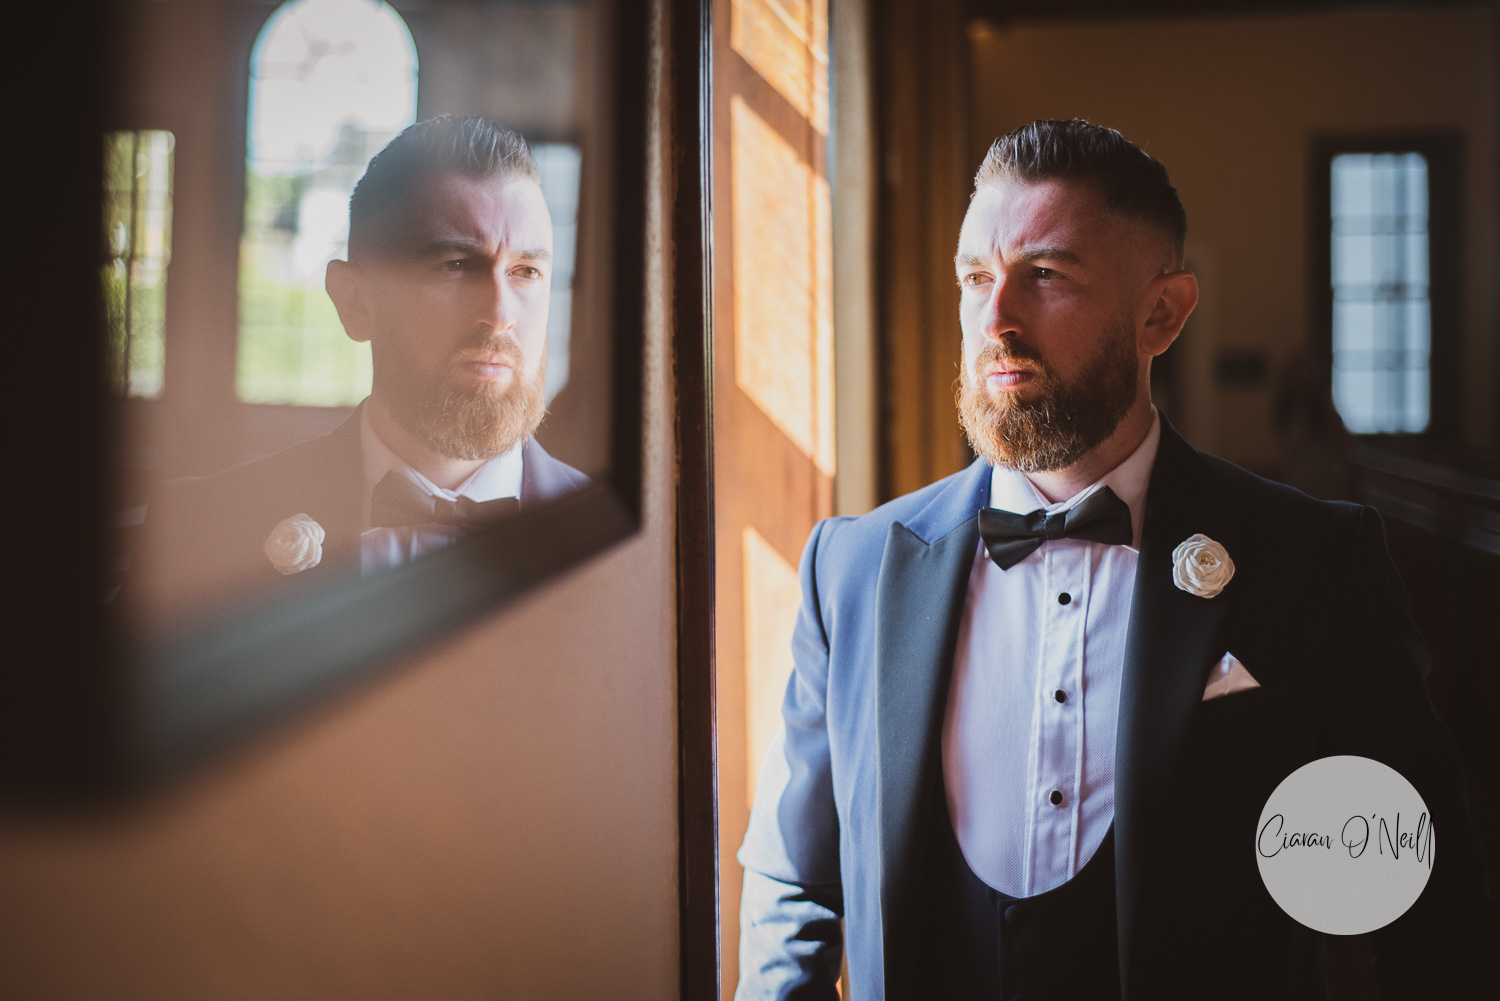 Reflection of the groom in a mirror